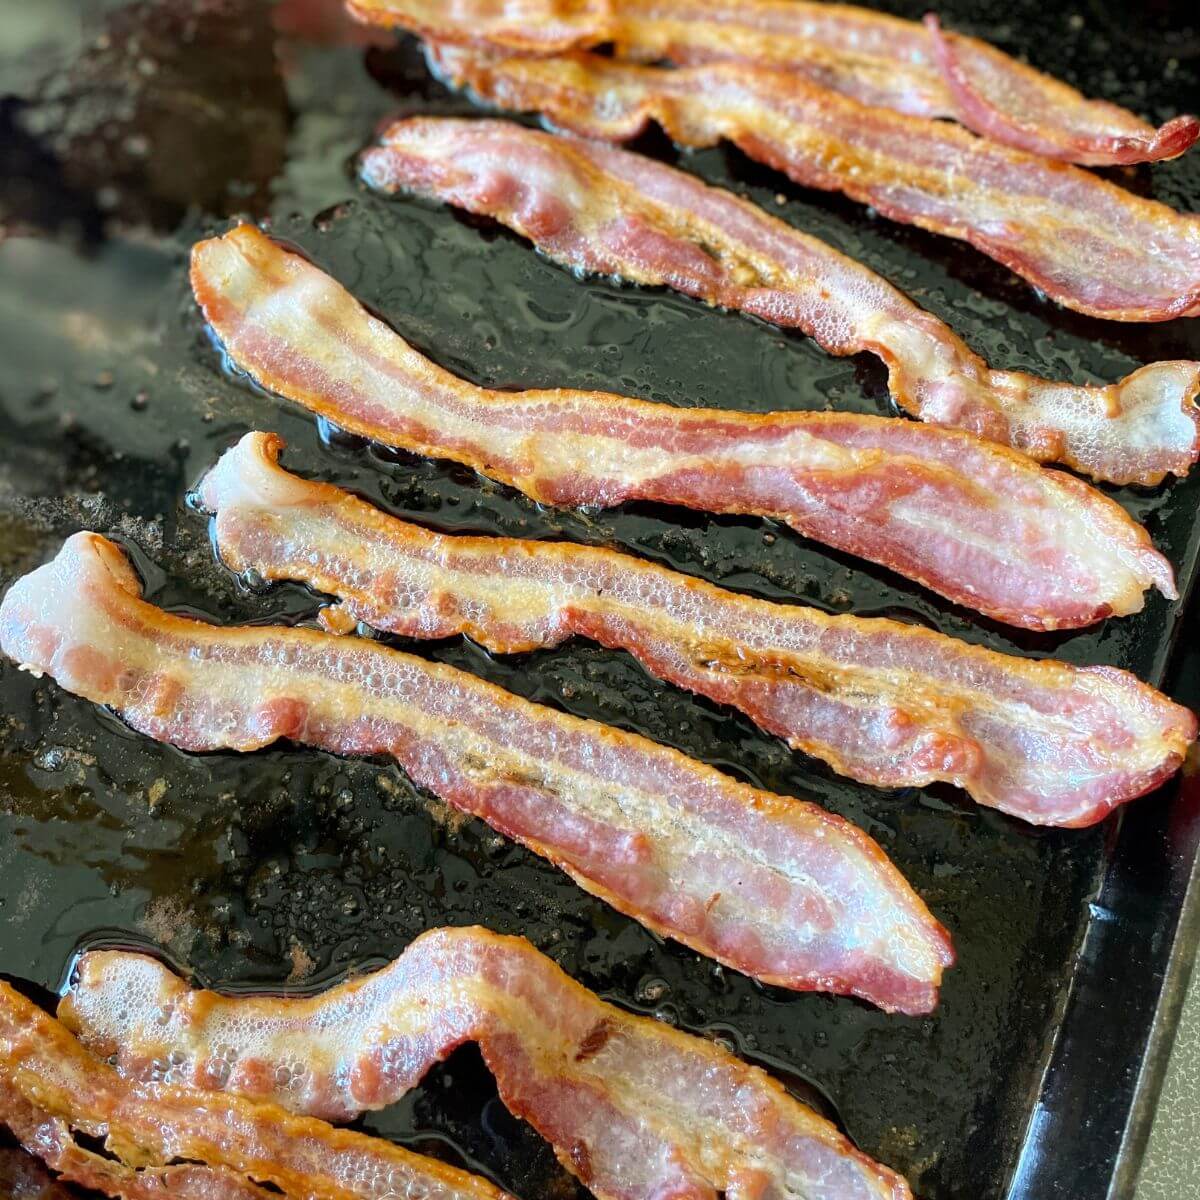 What You Should Consider Before Cooking Bacon On The Stovetop